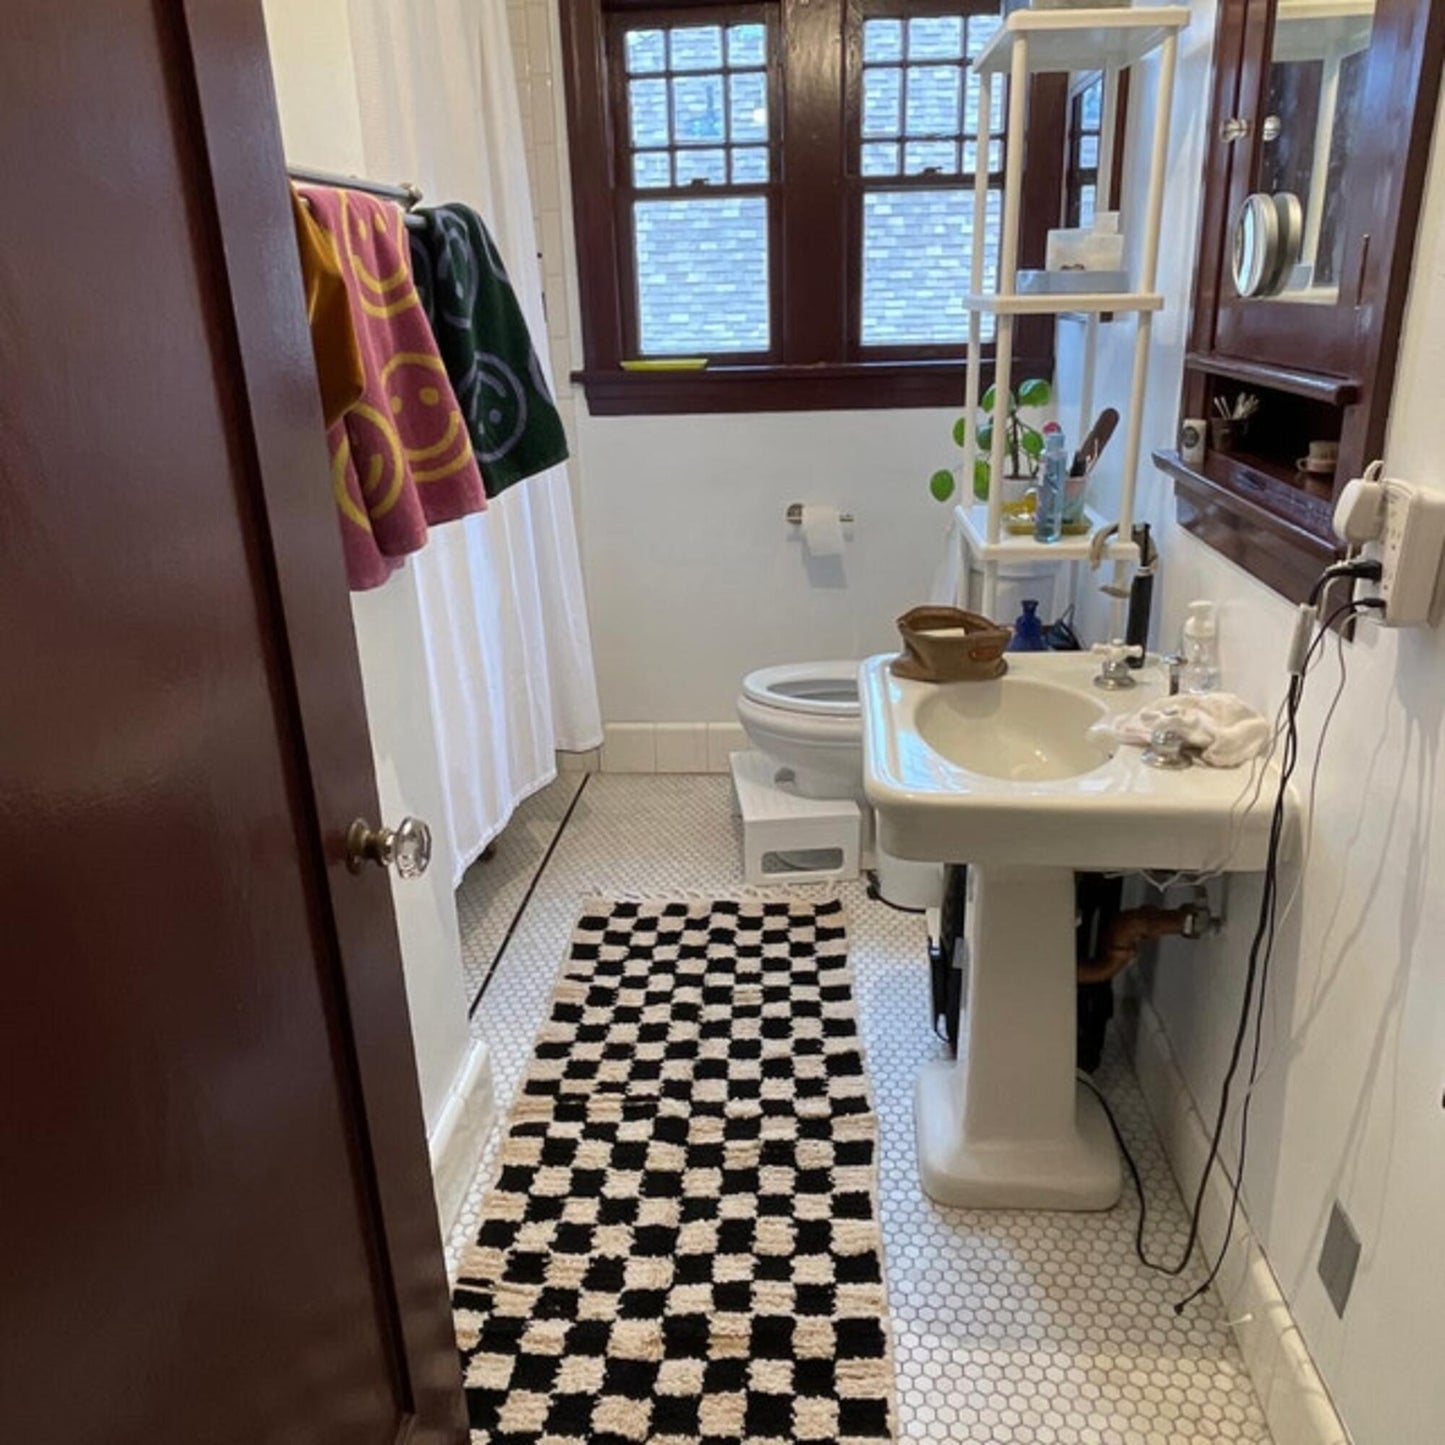 Black-white-Checkered-RUNNER-in-bathroom-in-mansion-Los-angeles-california